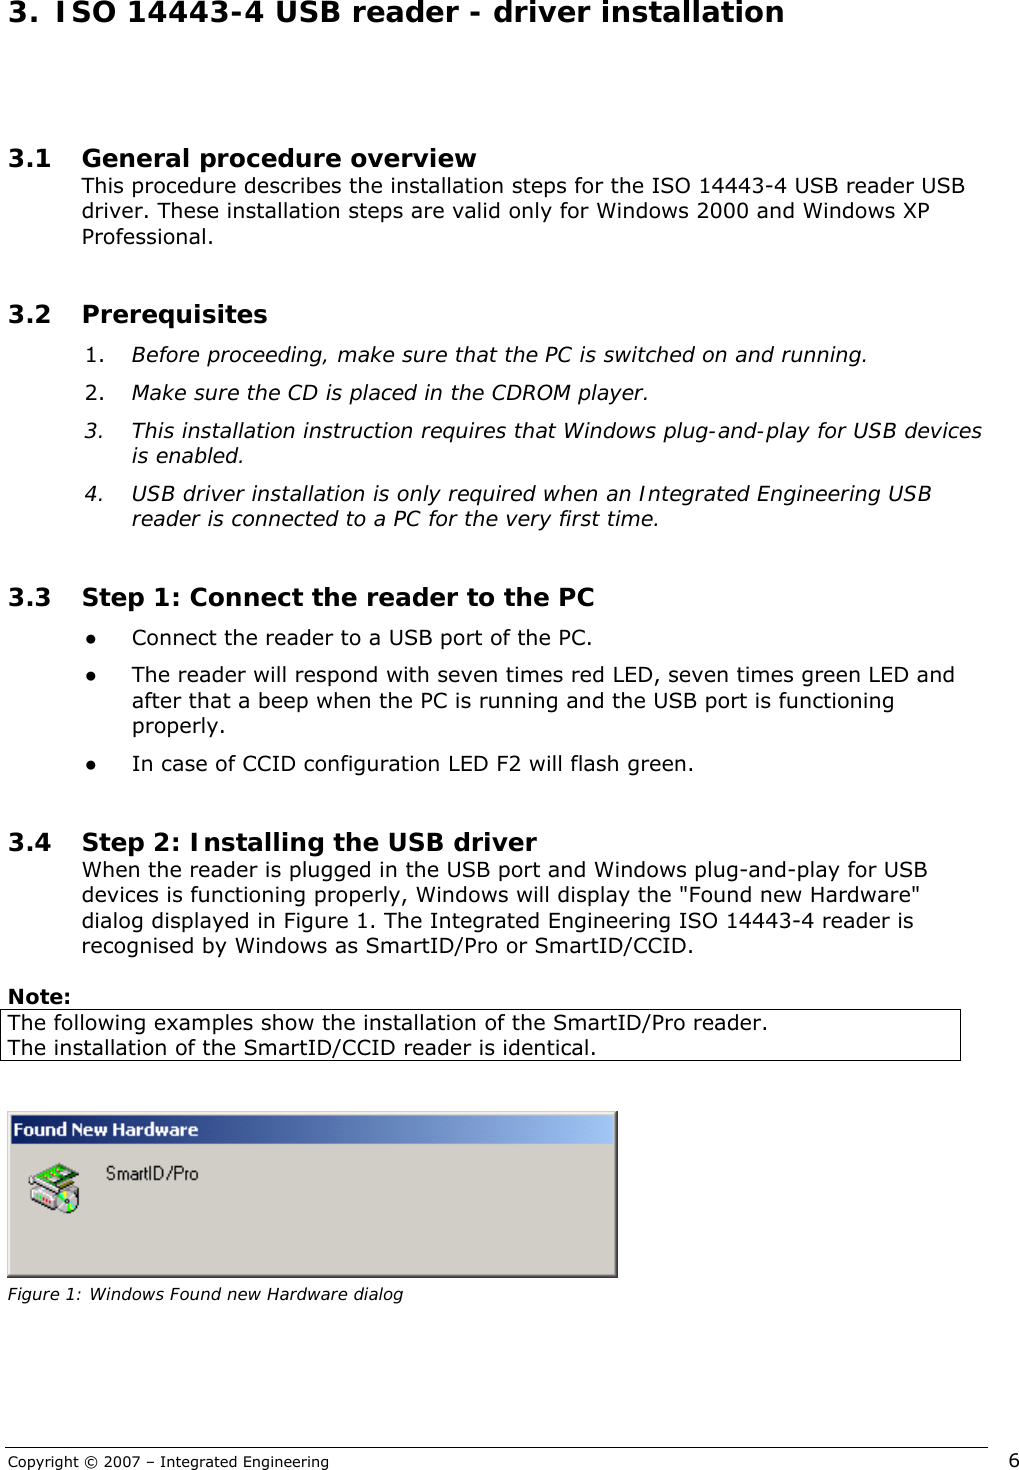 Copyright © 2007 – Integrated Engineering   6  3.1 General procedure overview This procedure describes the installation steps for the ISO 14443-4 USB reader USB driver. These installation steps are valid only for Windows 2000 and Windows XP Professional.  3.2 Prerequisites 1. Before proceeding, make sure that the PC is switched on and running.  2. Make sure the CD is placed in the CDROM player. 3. This installation instruction requires that Windows plug-and-play for USB devices is enabled. 4. USB driver installation is only required when an Integrated Engineering USB reader is connected to a PC for the very first time.  3.3 Step 1: Connect the reader to the PC ● Connect the reader to a USB port of the PC.  ● The reader will respond with seven times red LED, seven times green LED and after that a beep when the PC is running and the USB port is functioning properly. ● In case of CCID configuration LED F2 will flash green.  3.4 Step 2: Installing the USB driver When the reader is plugged in the USB port and Windows plug-and-play for USB devices is functioning properly, Windows will display the &quot;Found new Hardware&quot; dialog displayed in Figure 1. The Integrated Engineering ISO 14443-4 reader is recognised by Windows as SmartID/Pro or SmartID/CCID.  Note: The following examples show the installation of the SmartID/Pro reader. The installation of the SmartID/CCID reader is identical.    Figure 1: Windows Found new Hardware dialog 3.  ISO 14443-4 USB reader - driver installation 